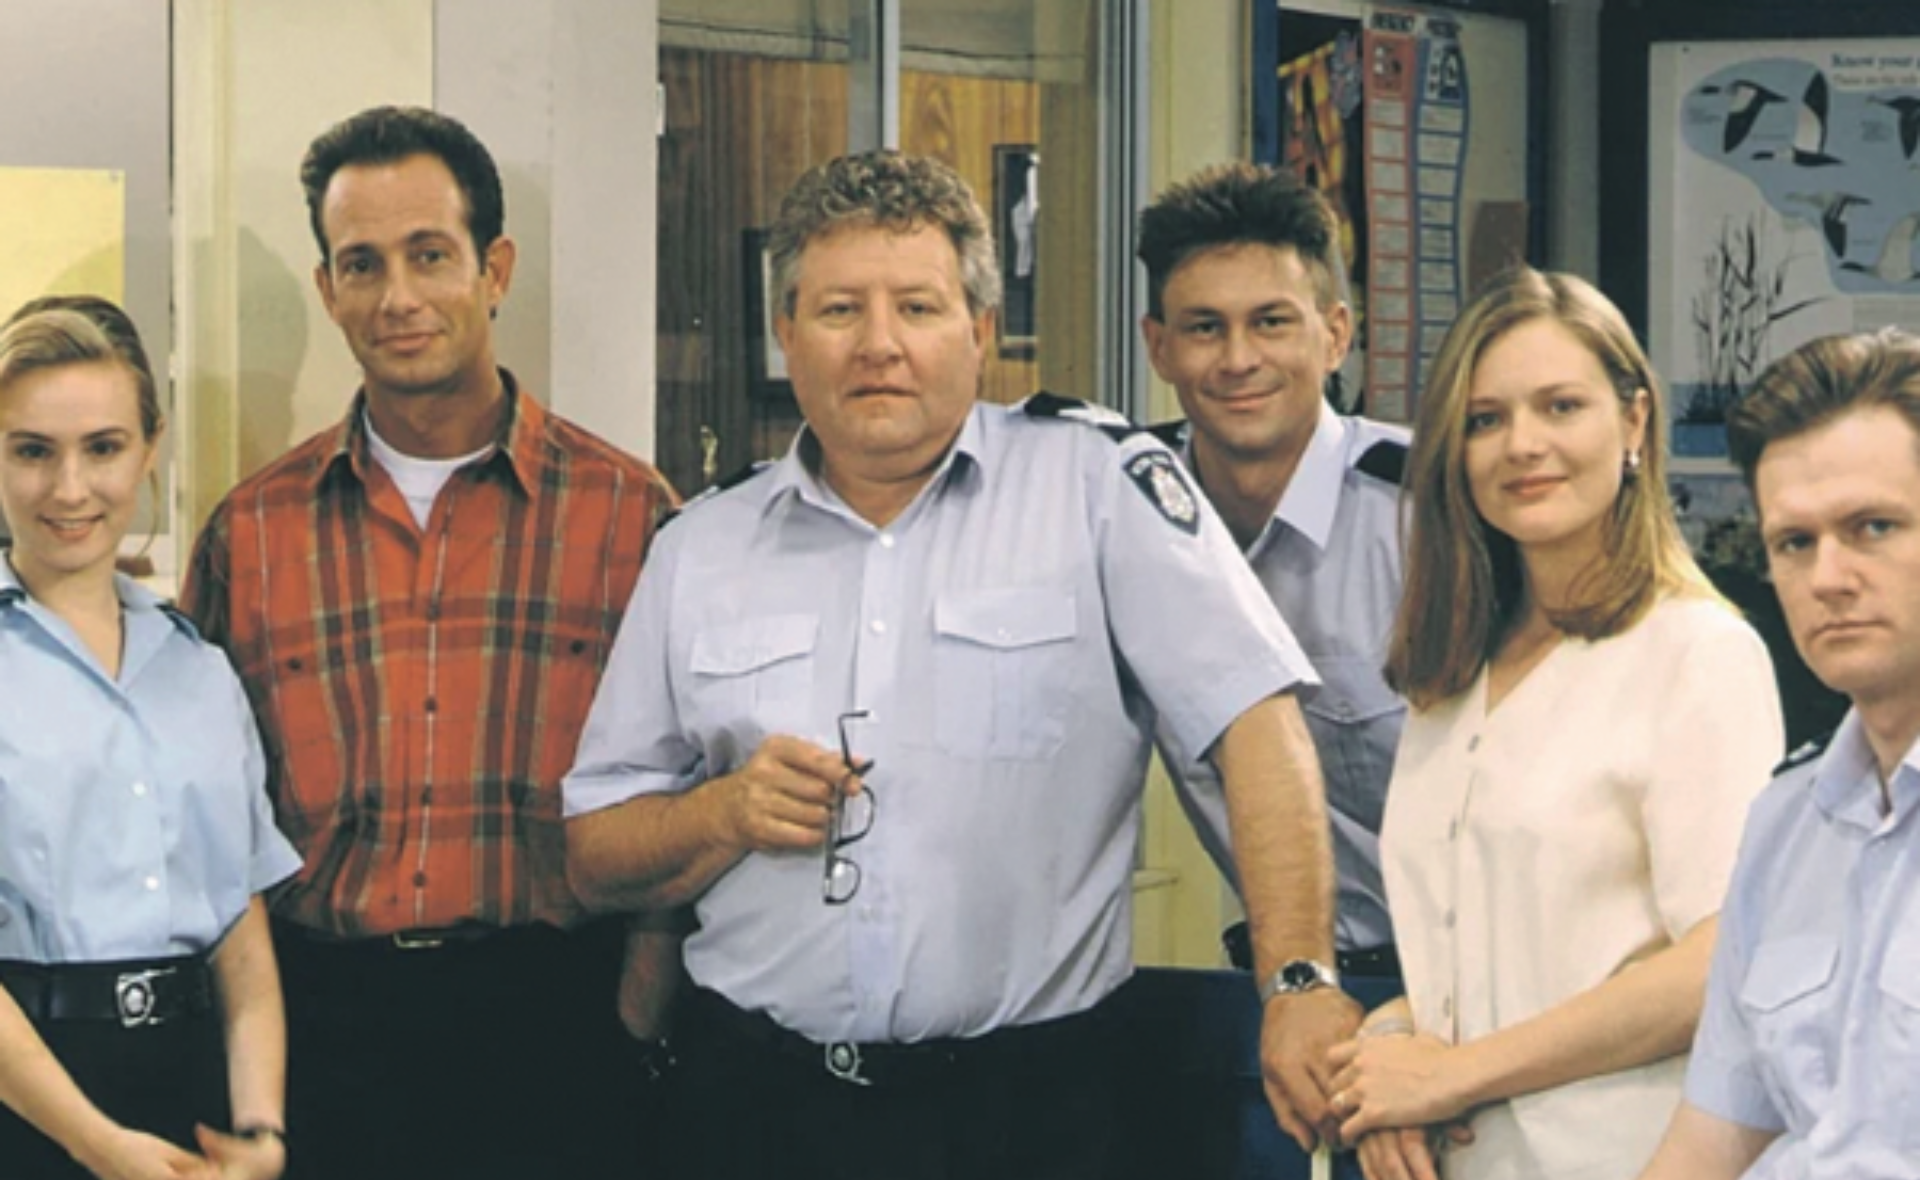 Where are the cast of Blue Heelers today?